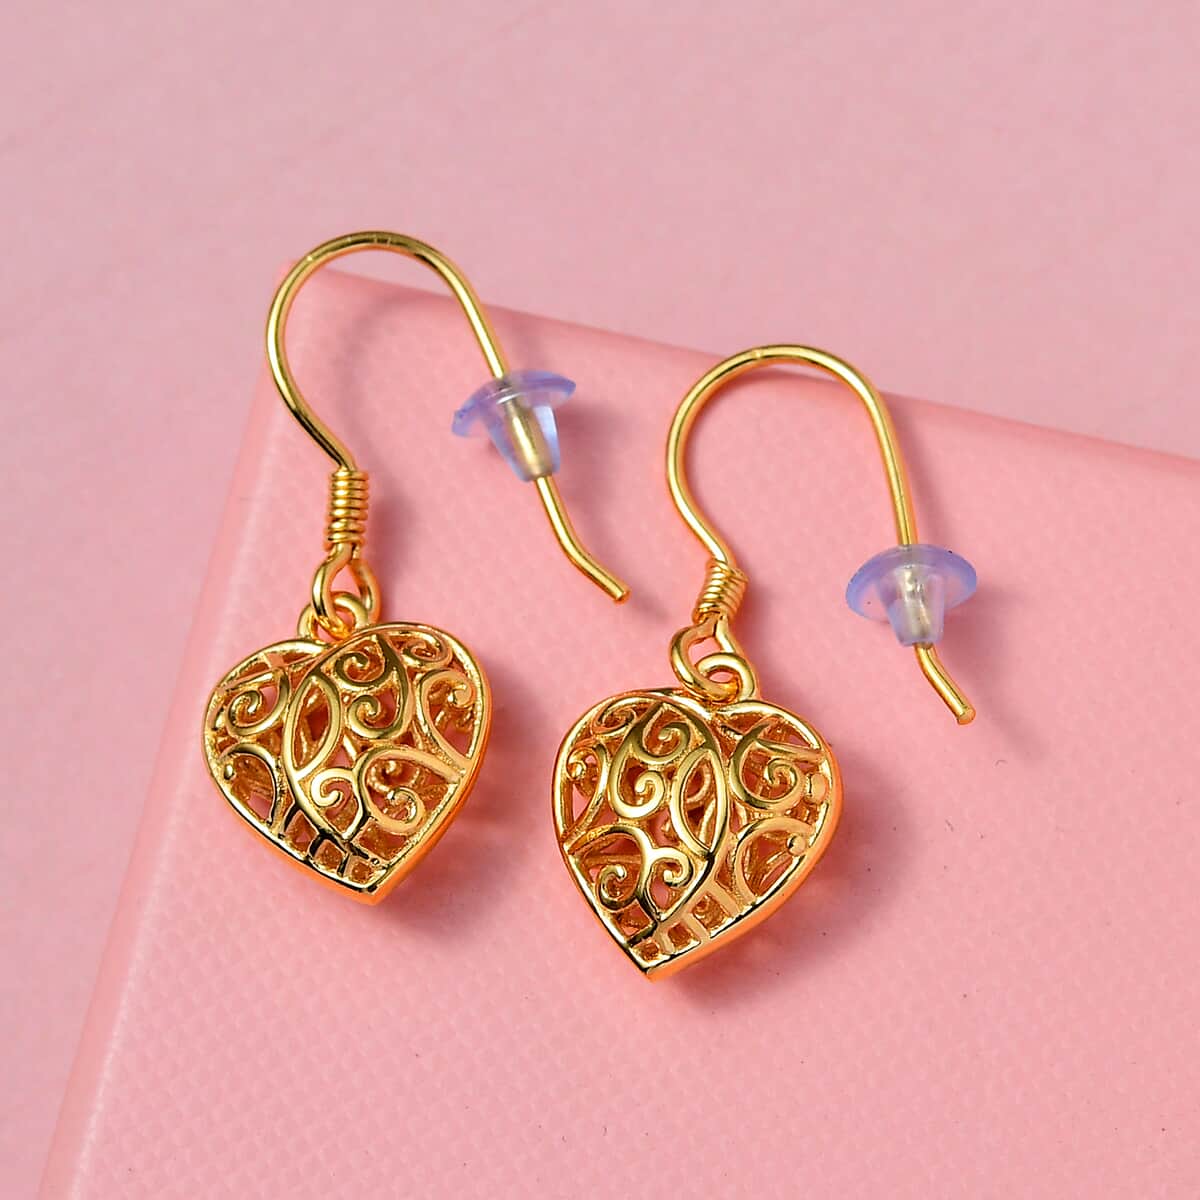 Mother’s Day Gift Openwork Drop Dangle Earrings in 14K Yellow Gold Plated Sterling Silver, Filigree Heart Earrings, Dangle Silver Earrings For Women image number 3